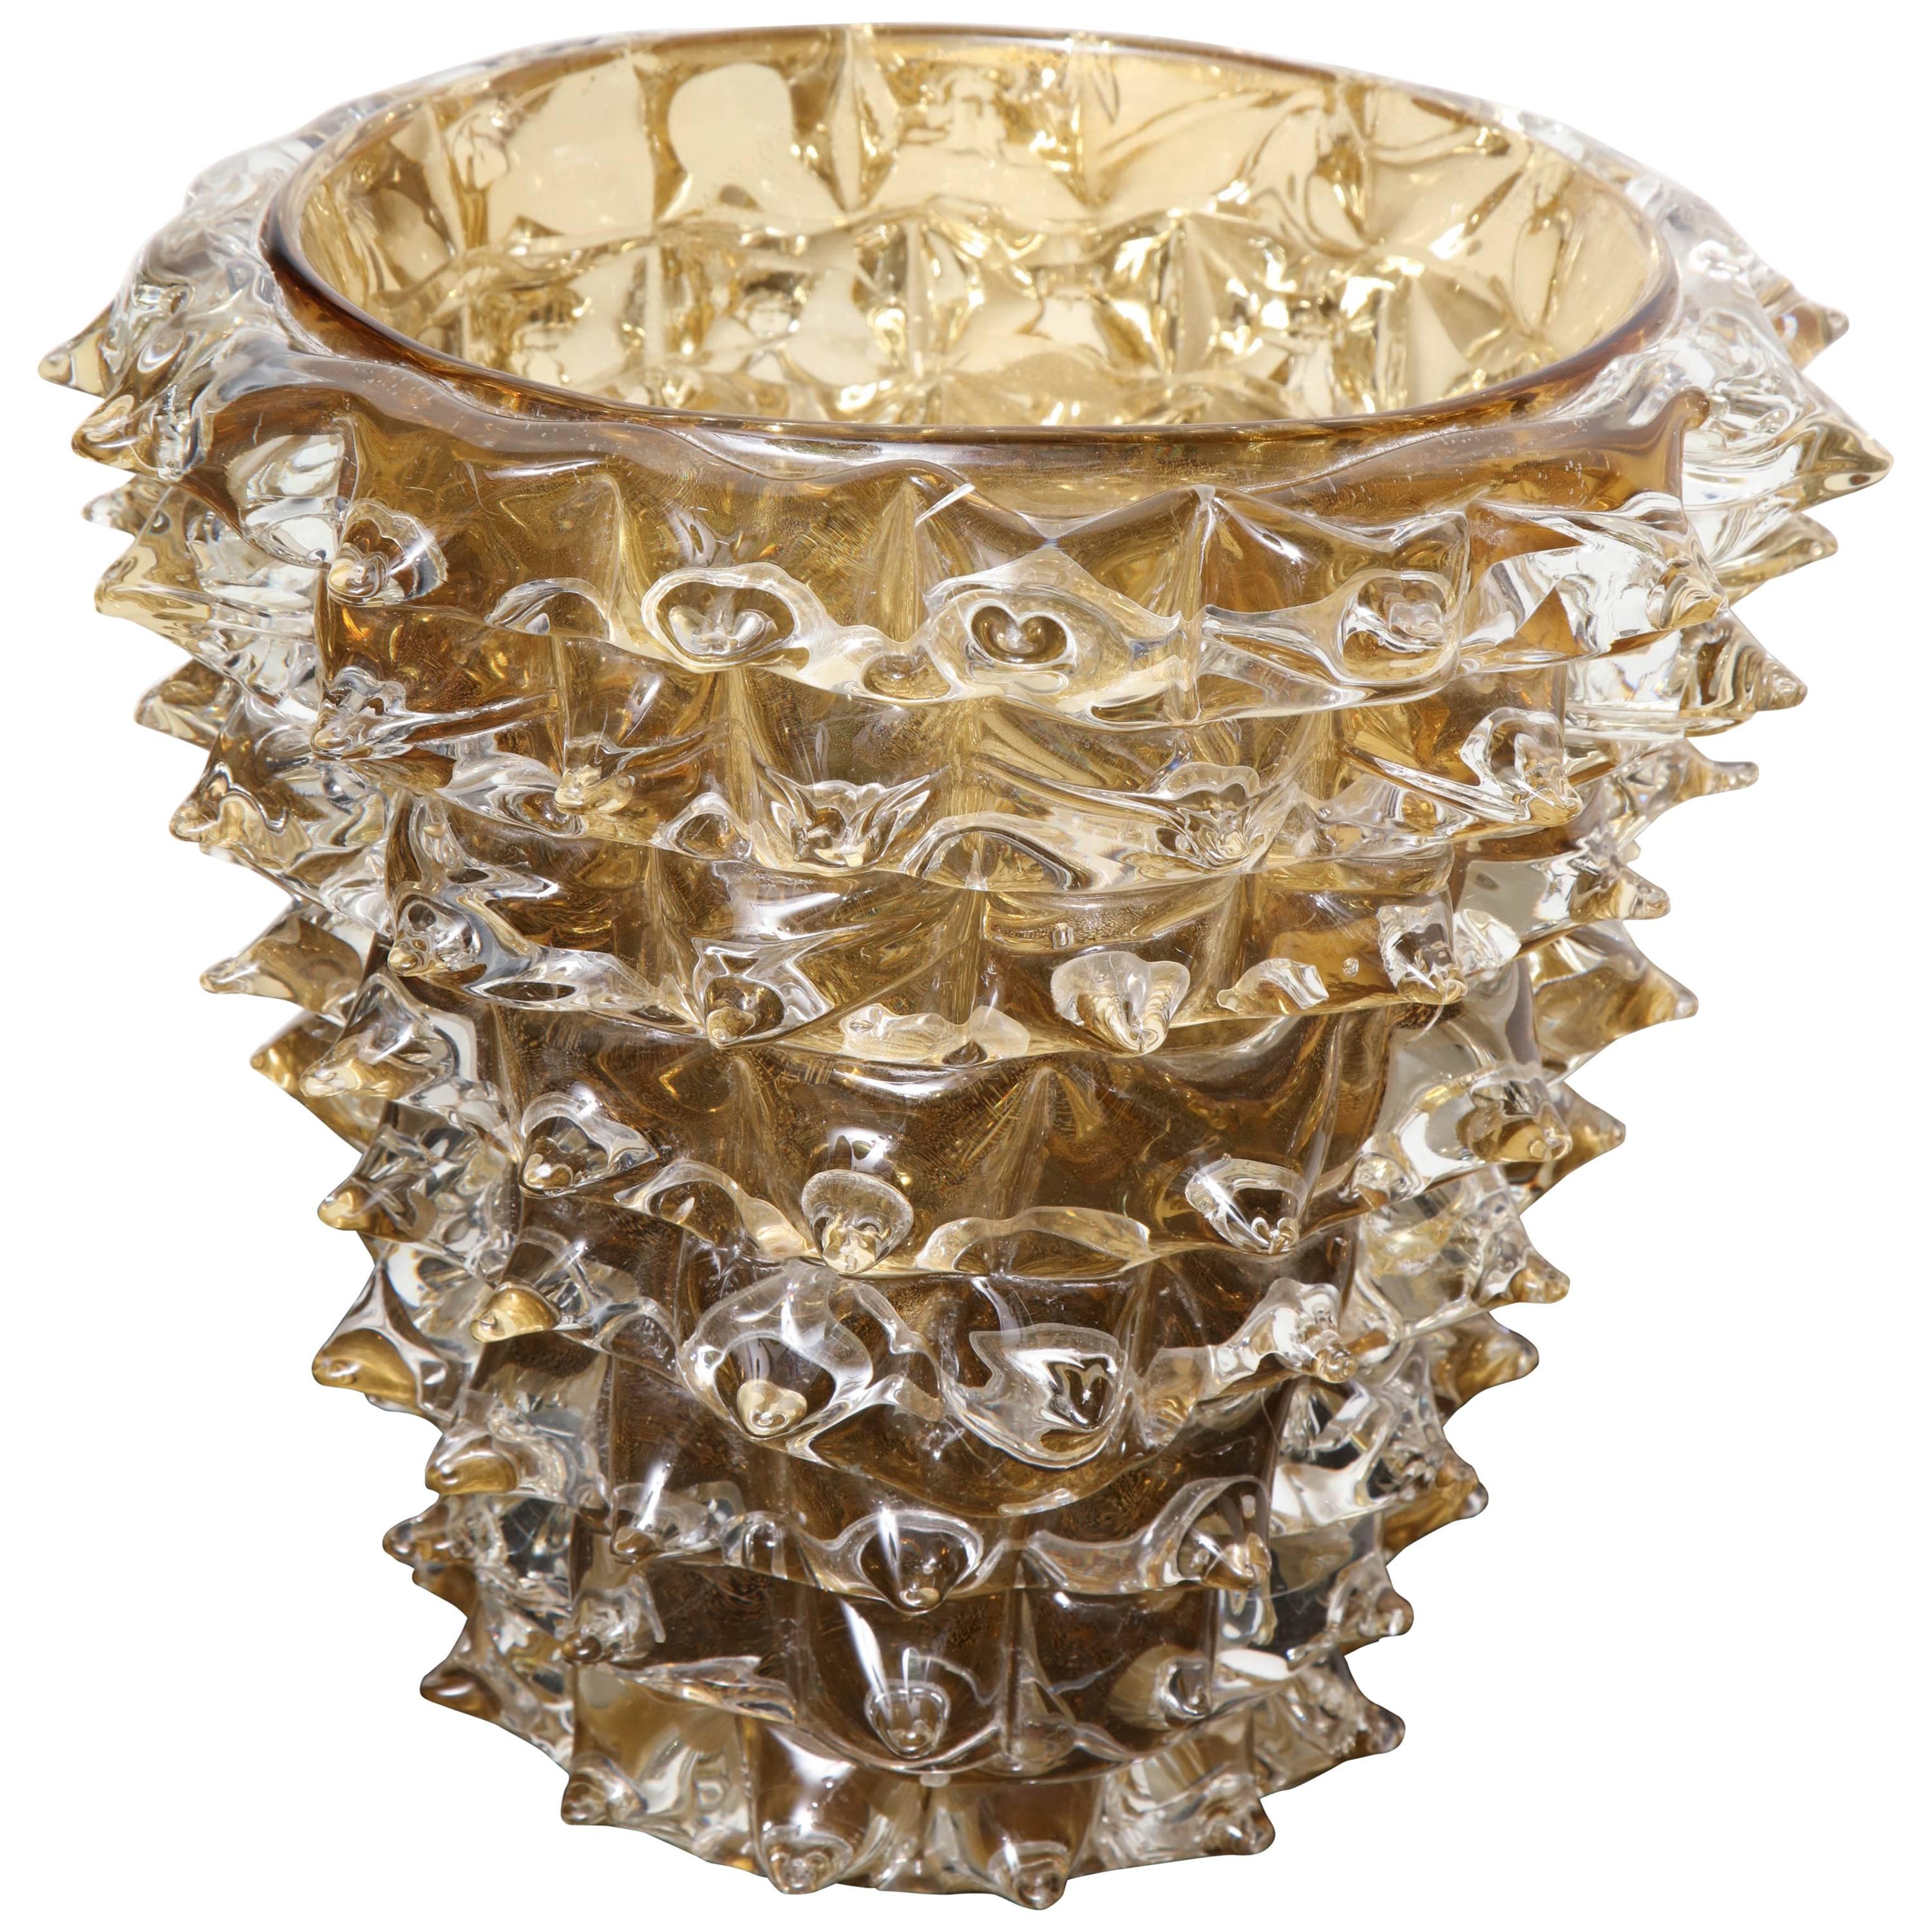 Signed Constantini Gold Spiked Murano Glass Vase